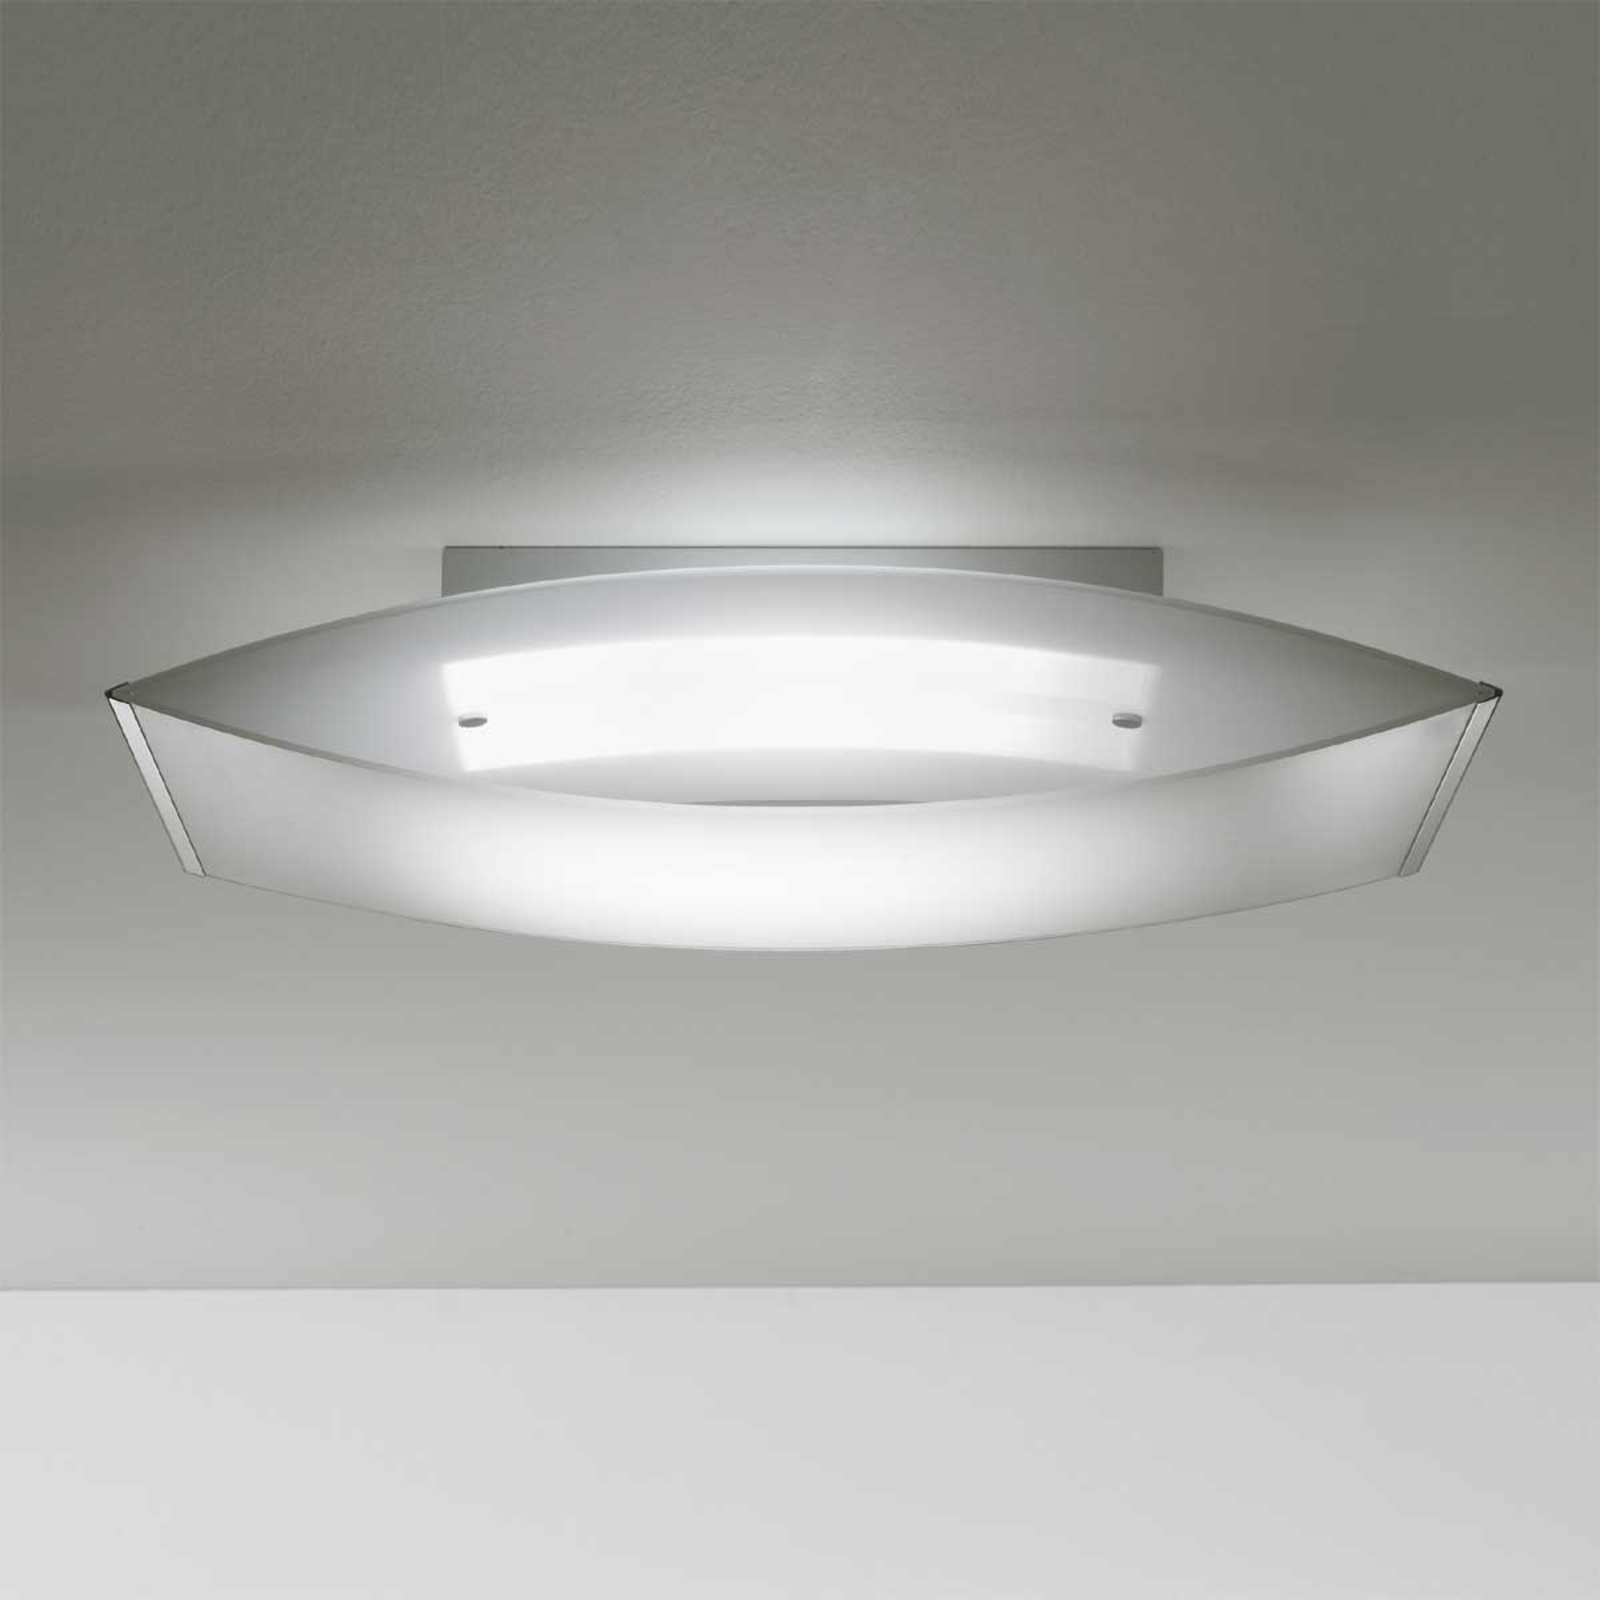 Curved ceiling light POEMA 9130 66 x 34 cm